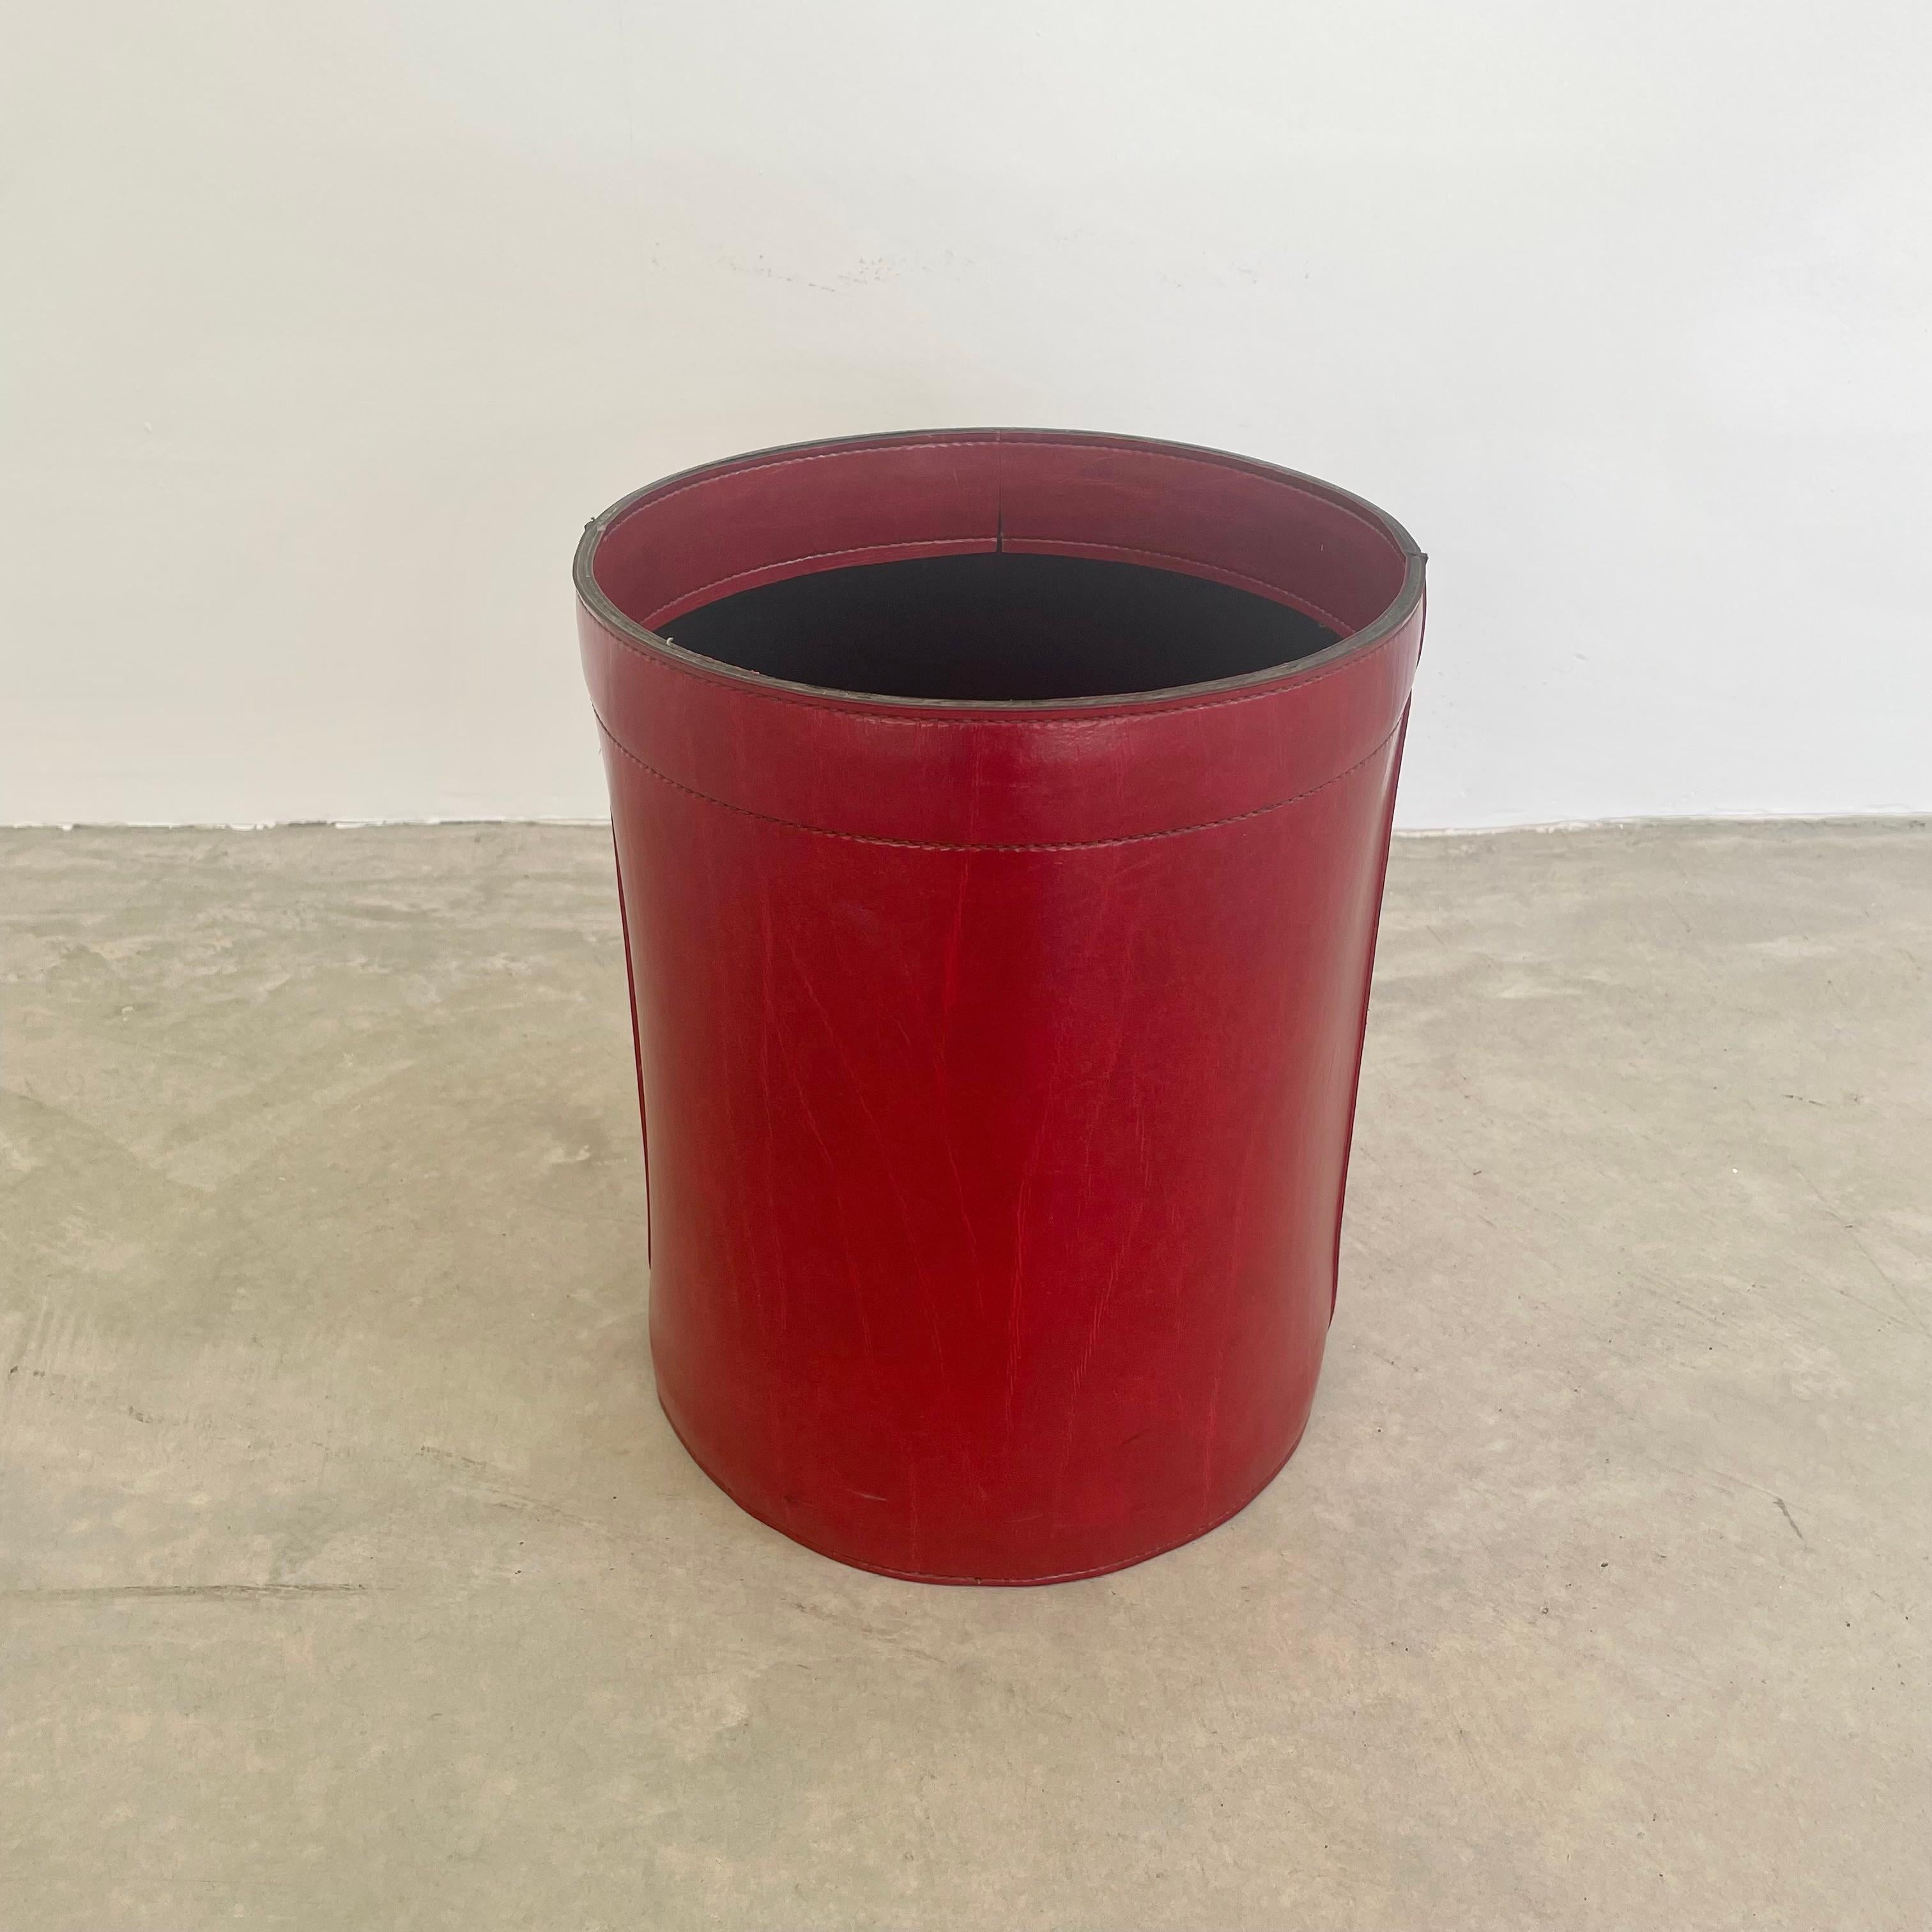 Faux Leather Red Adnet Style Waste Basket, 1960s France